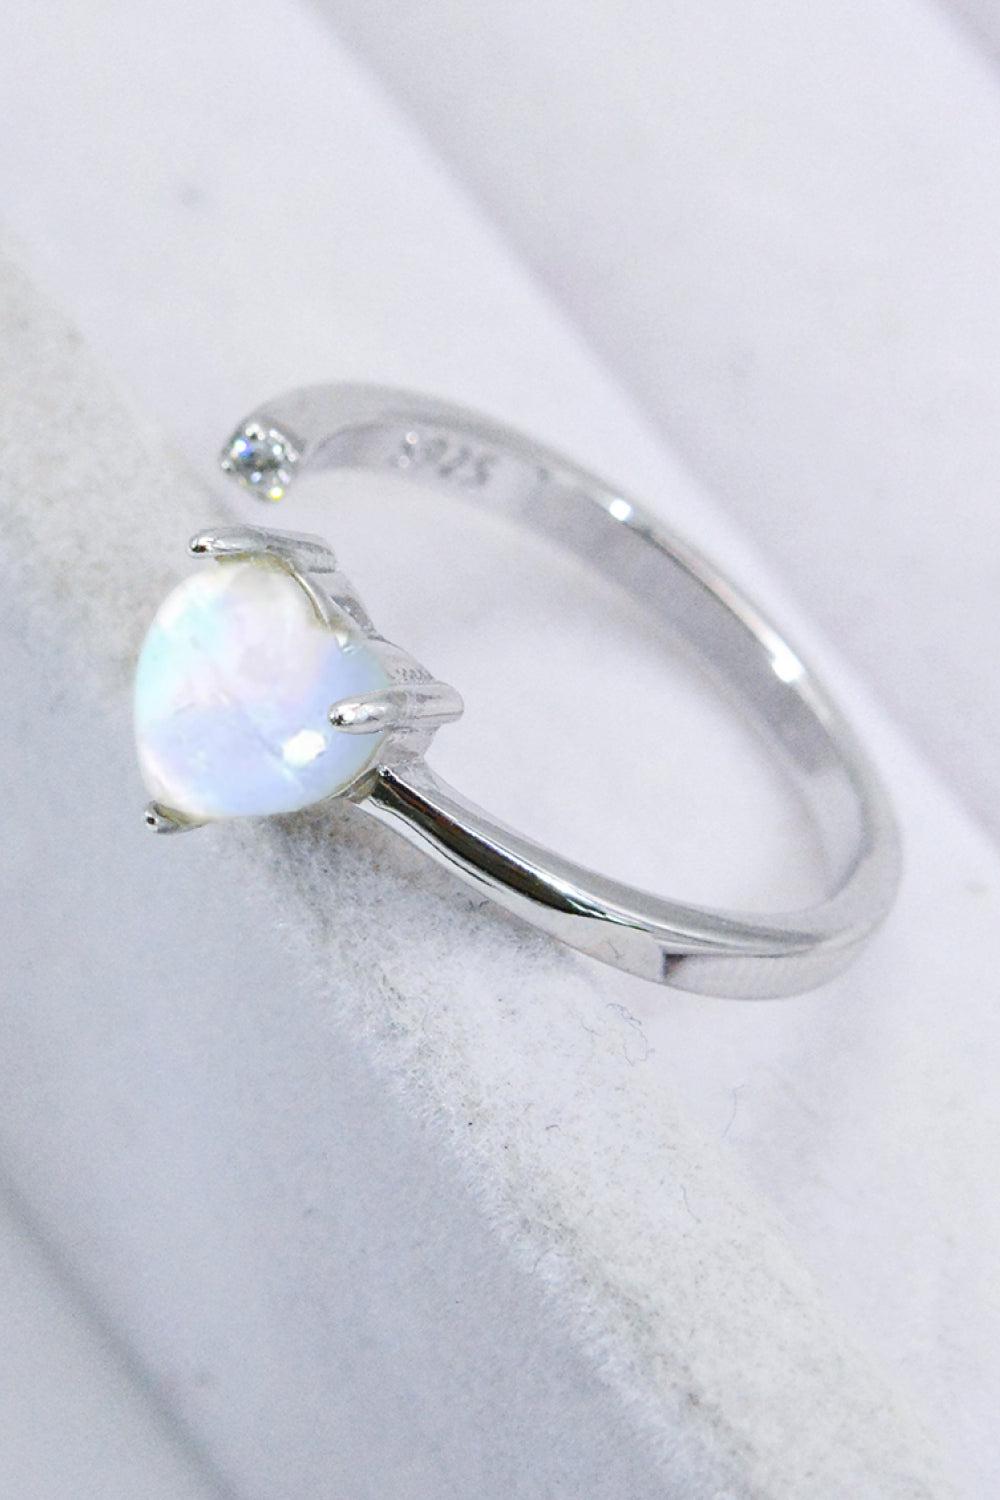 Inlaid Moonstone Heart Adjustable Open Ring BLUE ZONE PLANET